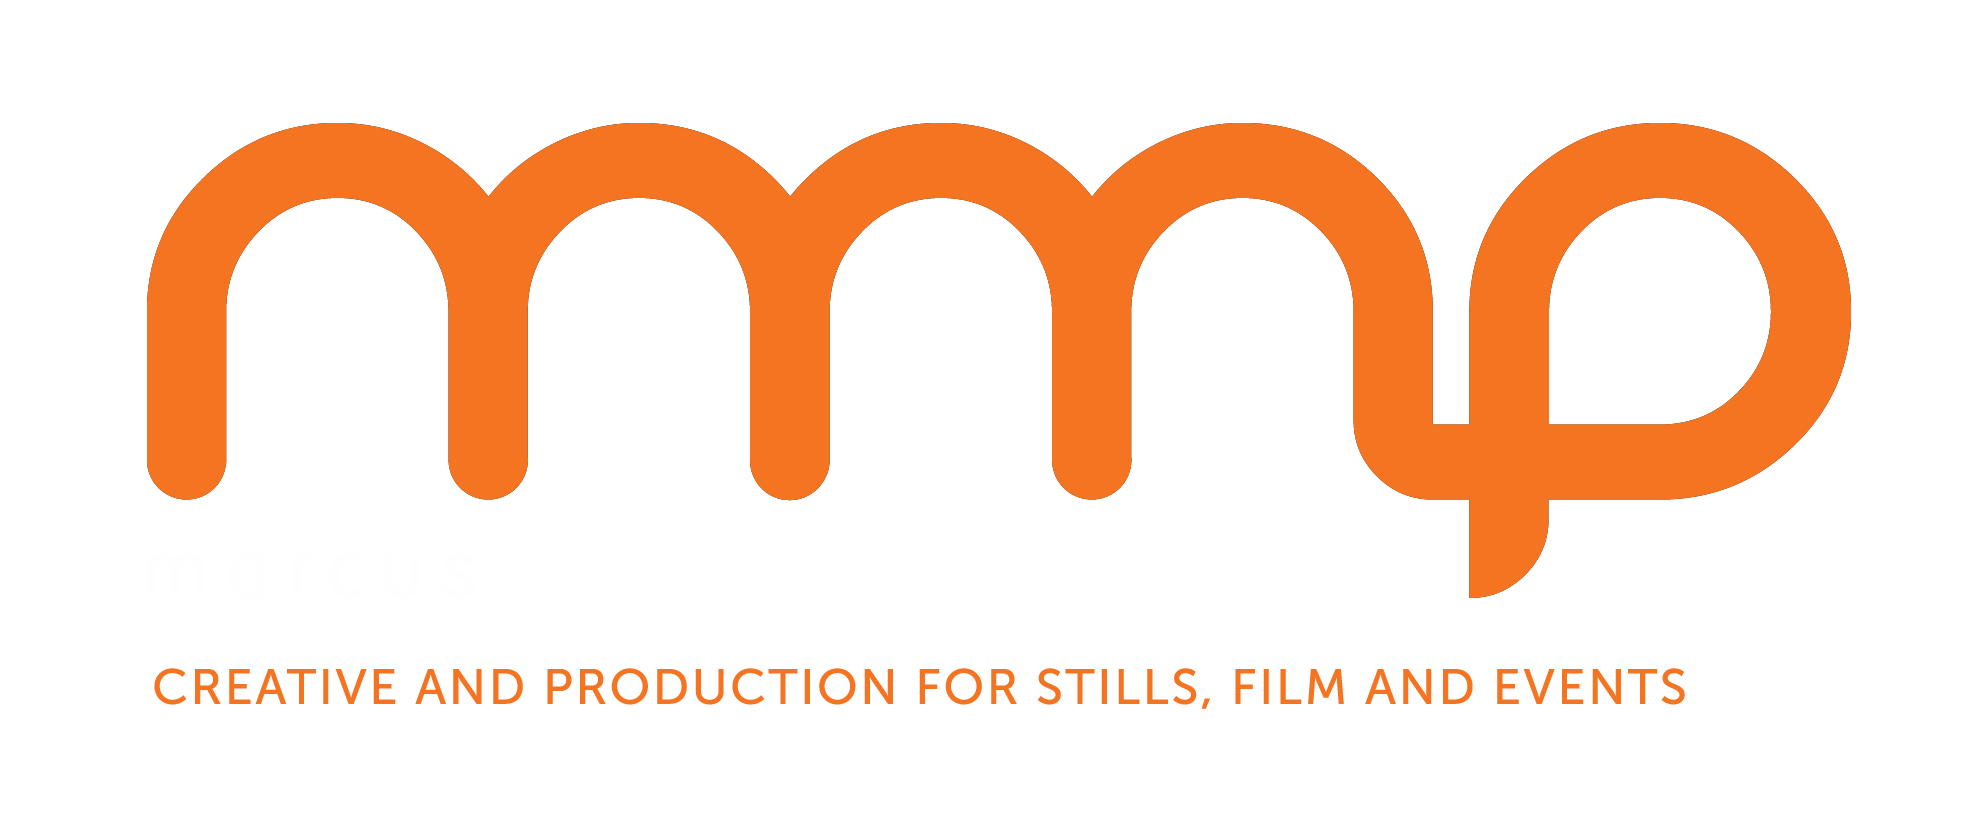 creative and production for stills, film and events